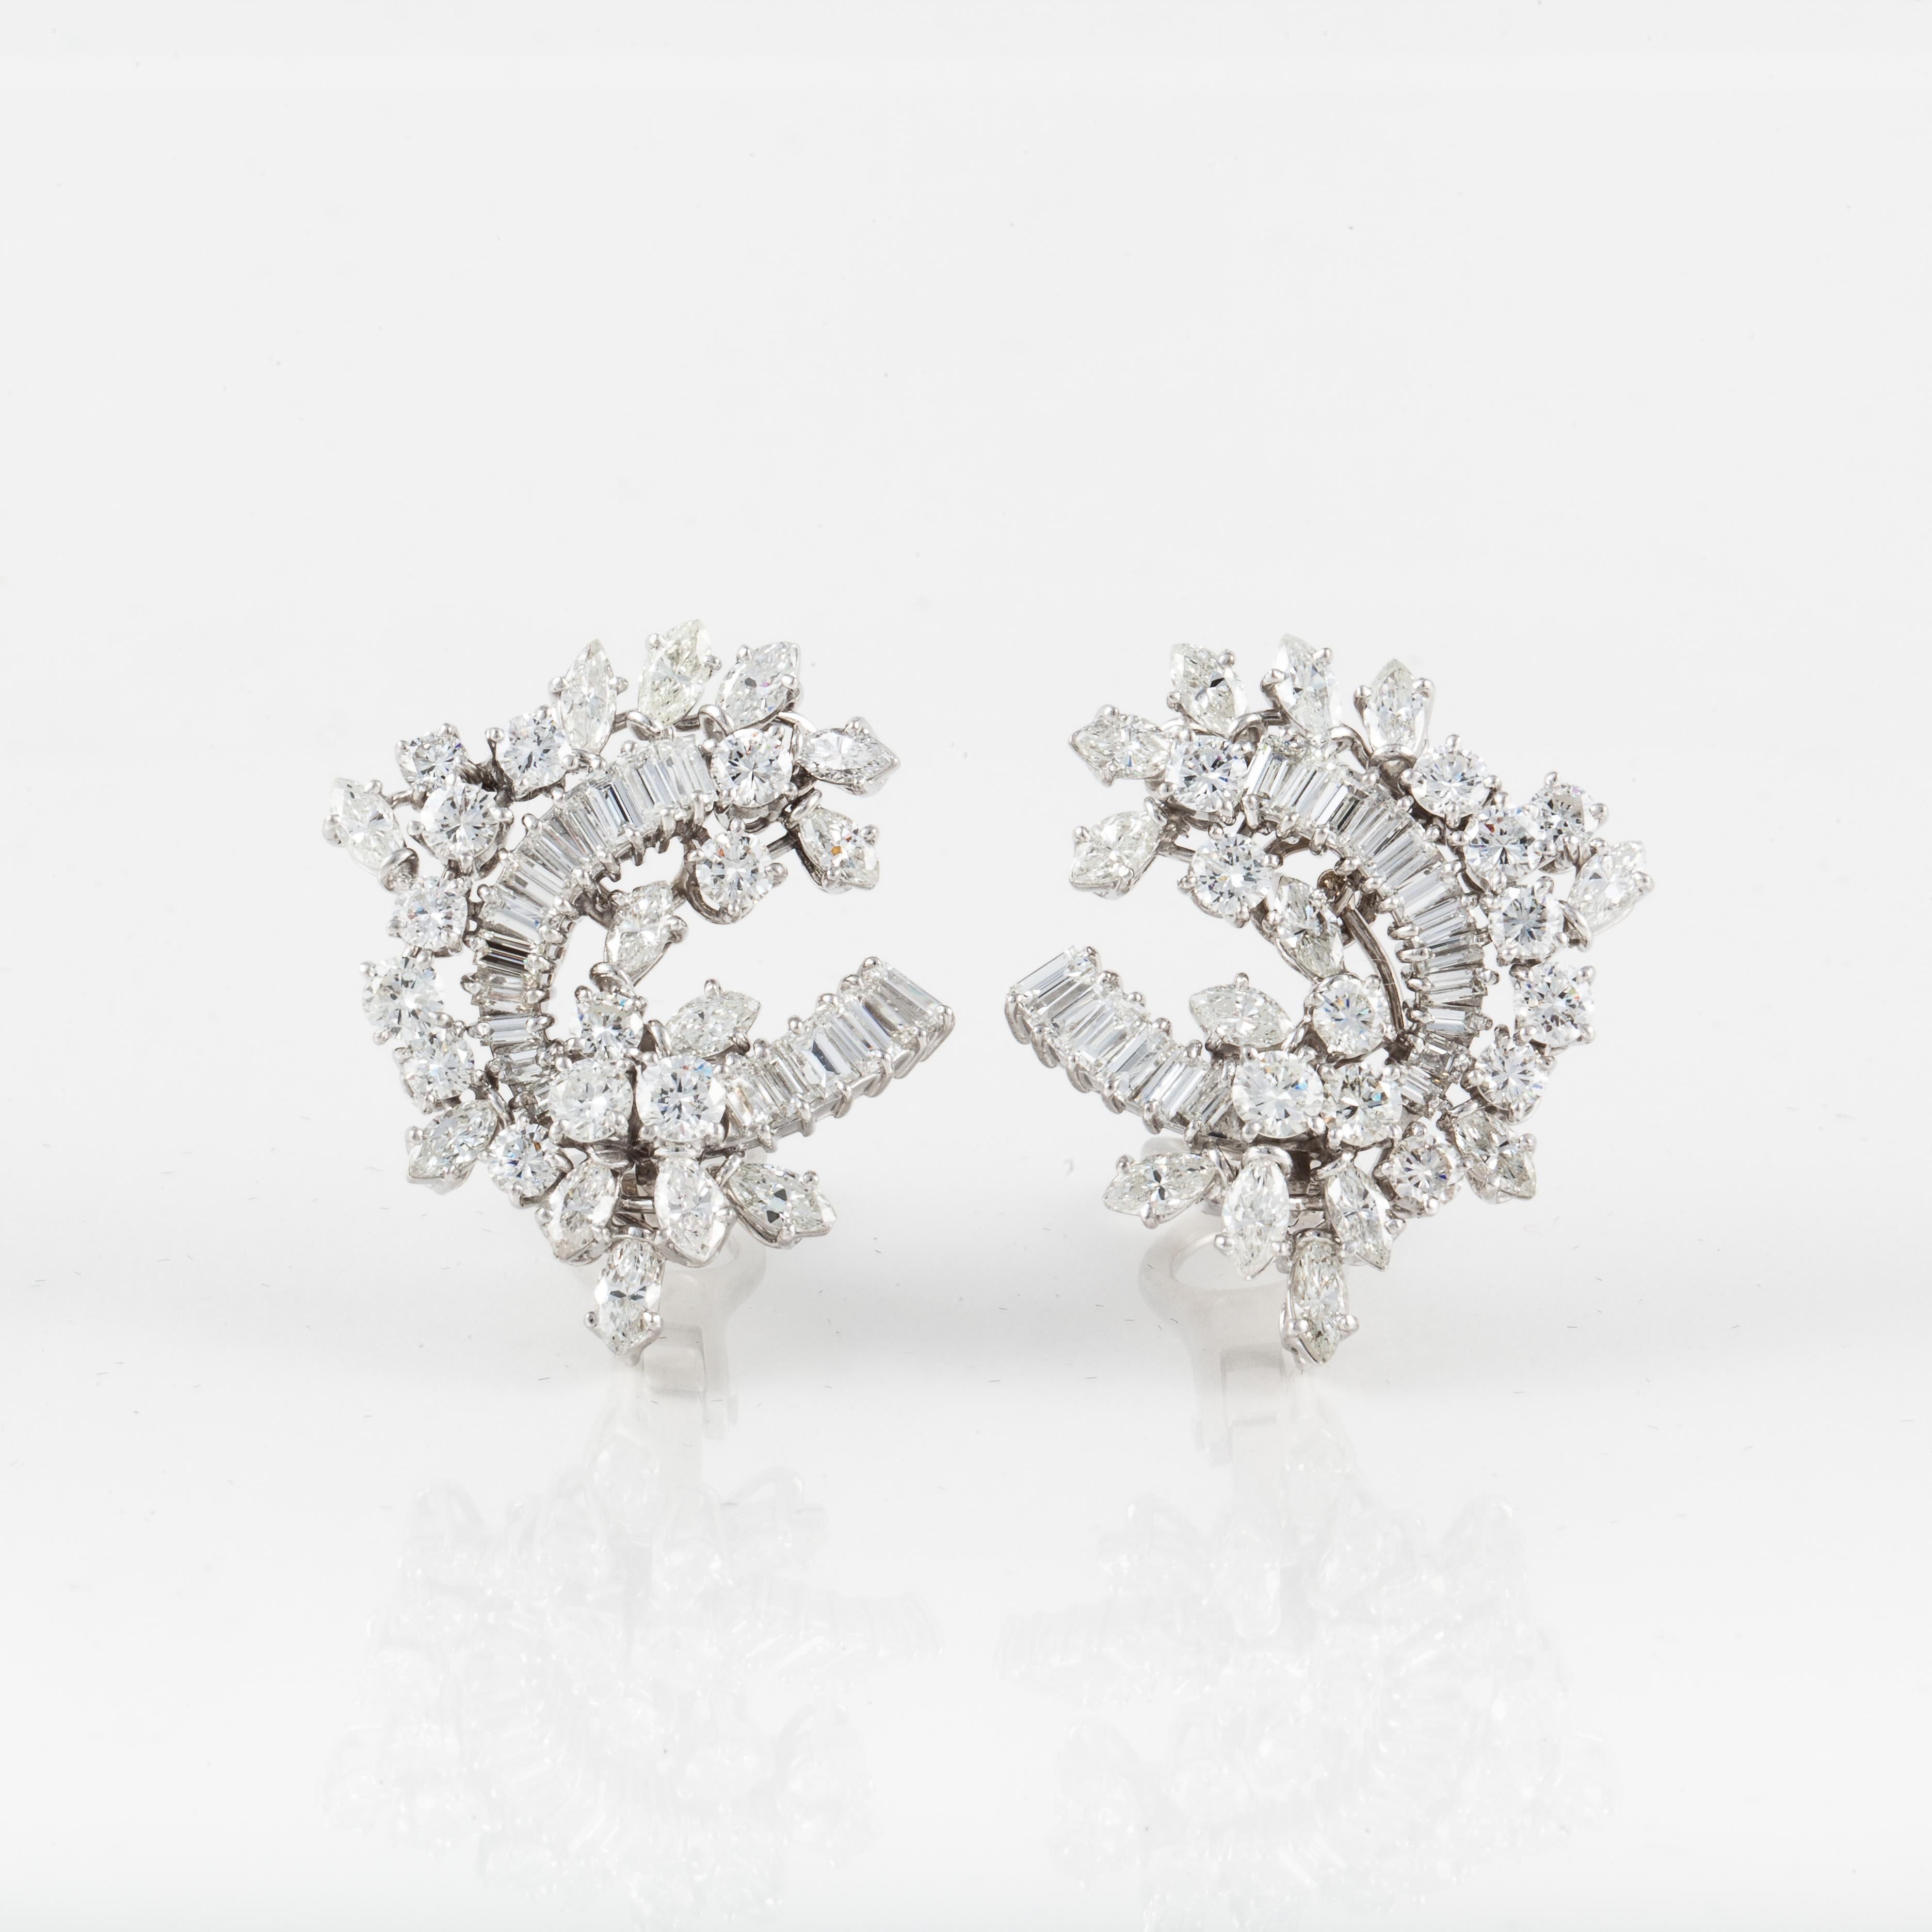 1950s platinum diamond cluster earrings featuring a stylized open frame floral design centrally set with 36 baguette-cut diamonds framed with 24 marquise and 22 round brilliant-cut diamonds that total 9.50 carats. The diamonds are G-I color and